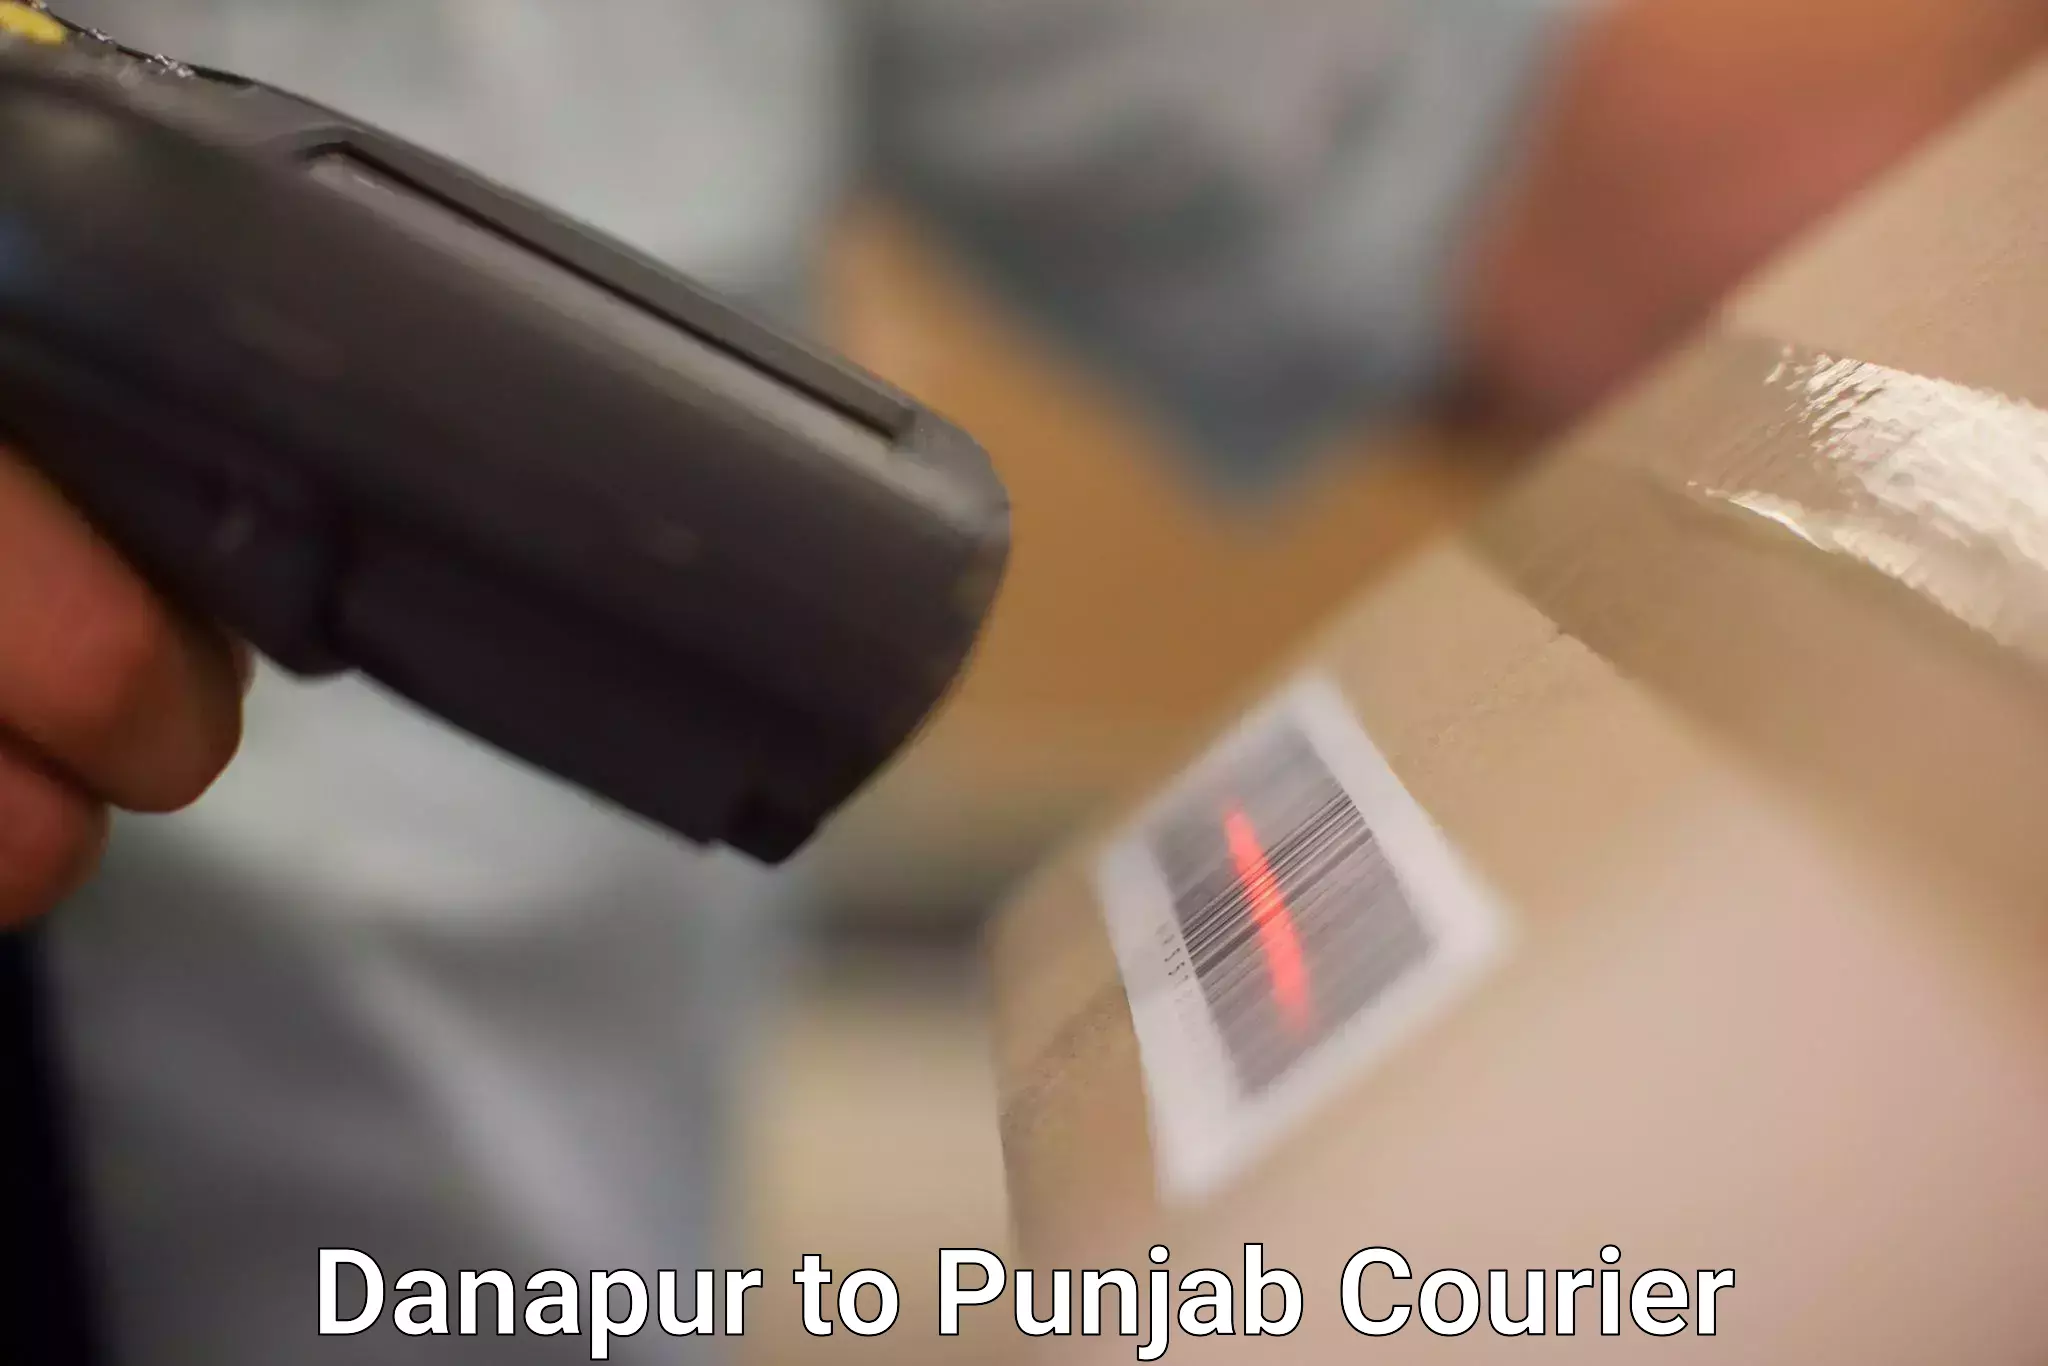 Package delivery network Danapur to Punjab